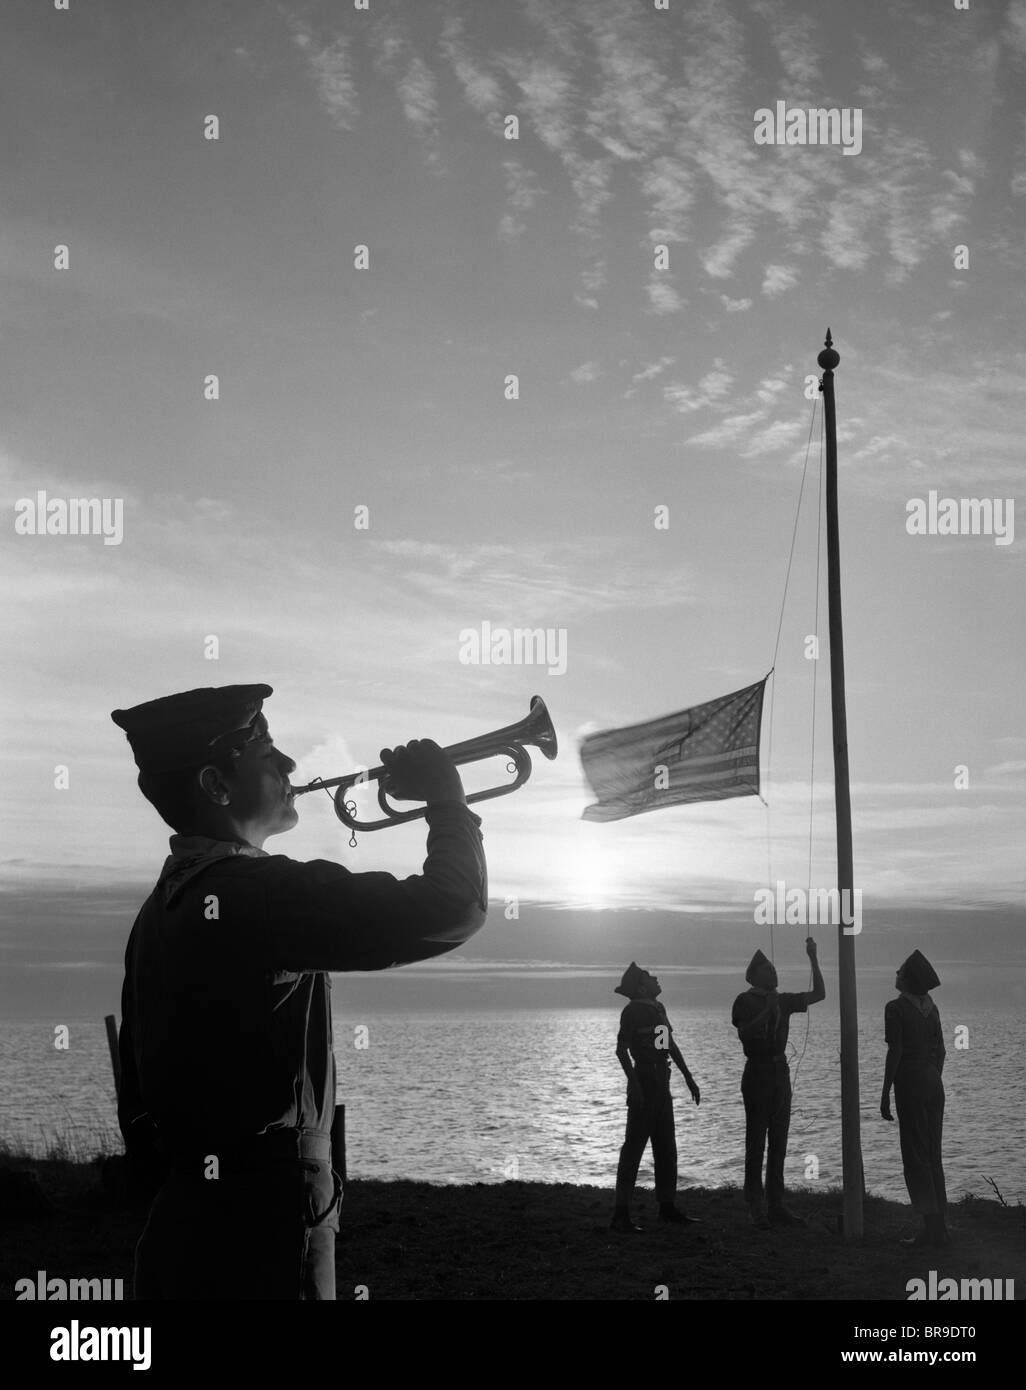 1960s BOY SCOUTS AT CAMP SUNSET LOWER AMERICAN FLAG BUGLE TAPS 4 BOYS UNIFORM SILHOUETTED Stock Photo